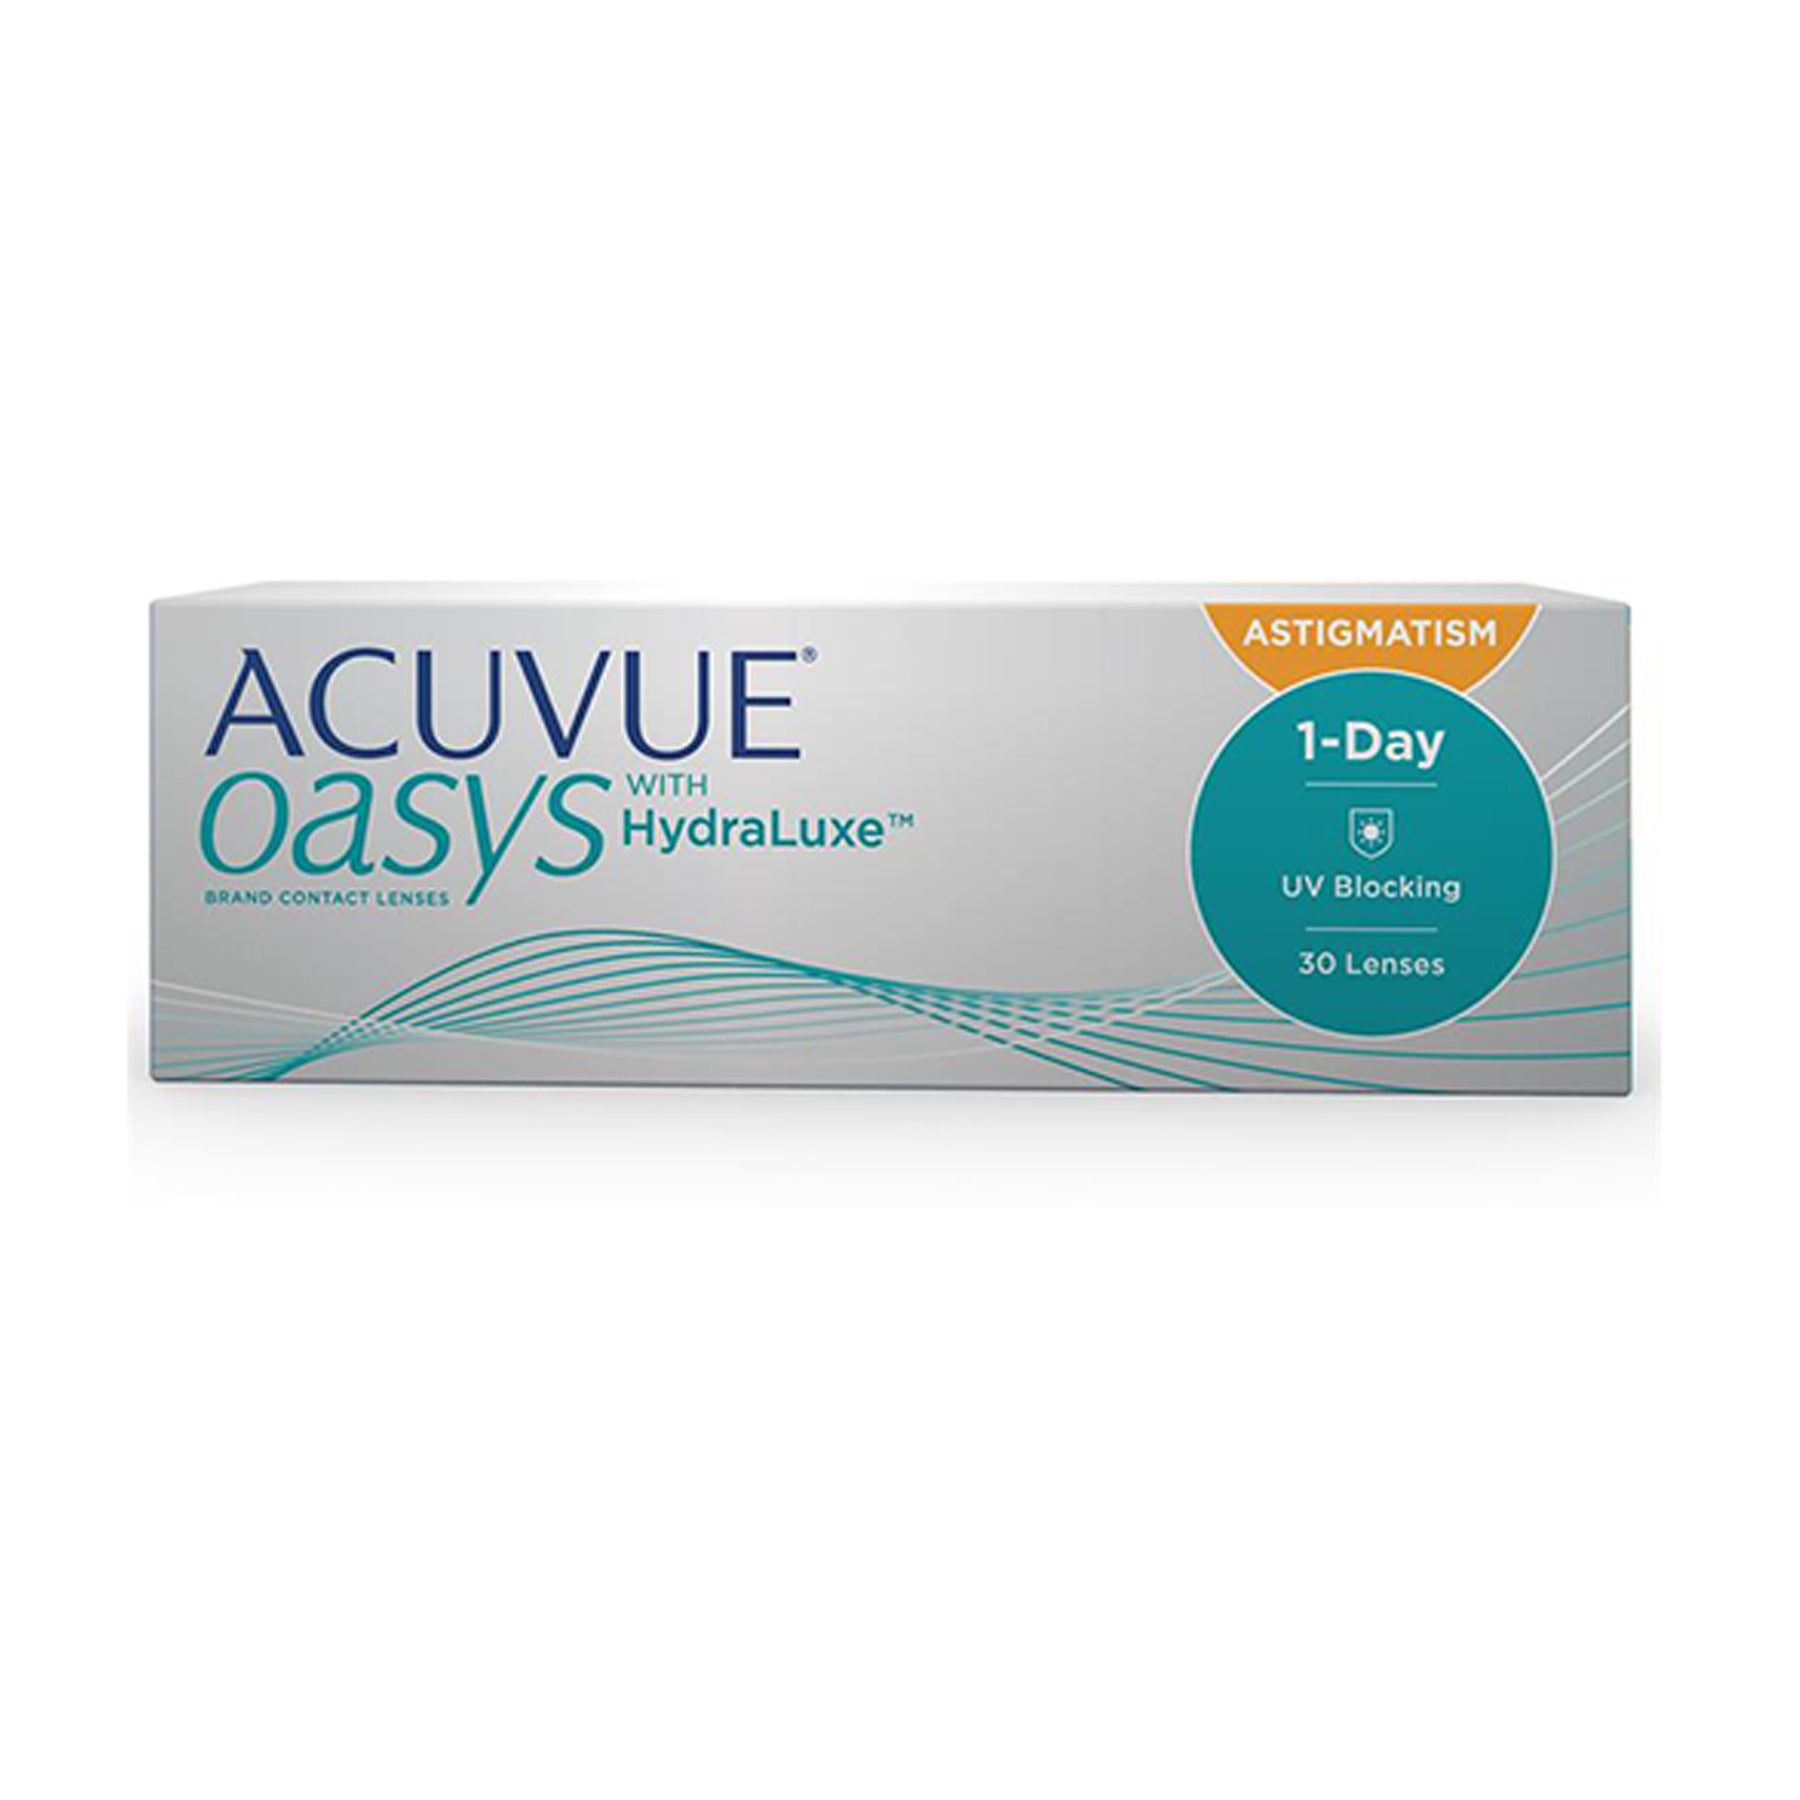 ACUVUE Oasys for Astigmatism 1Day Disposable Astigmatism Contact Lenses